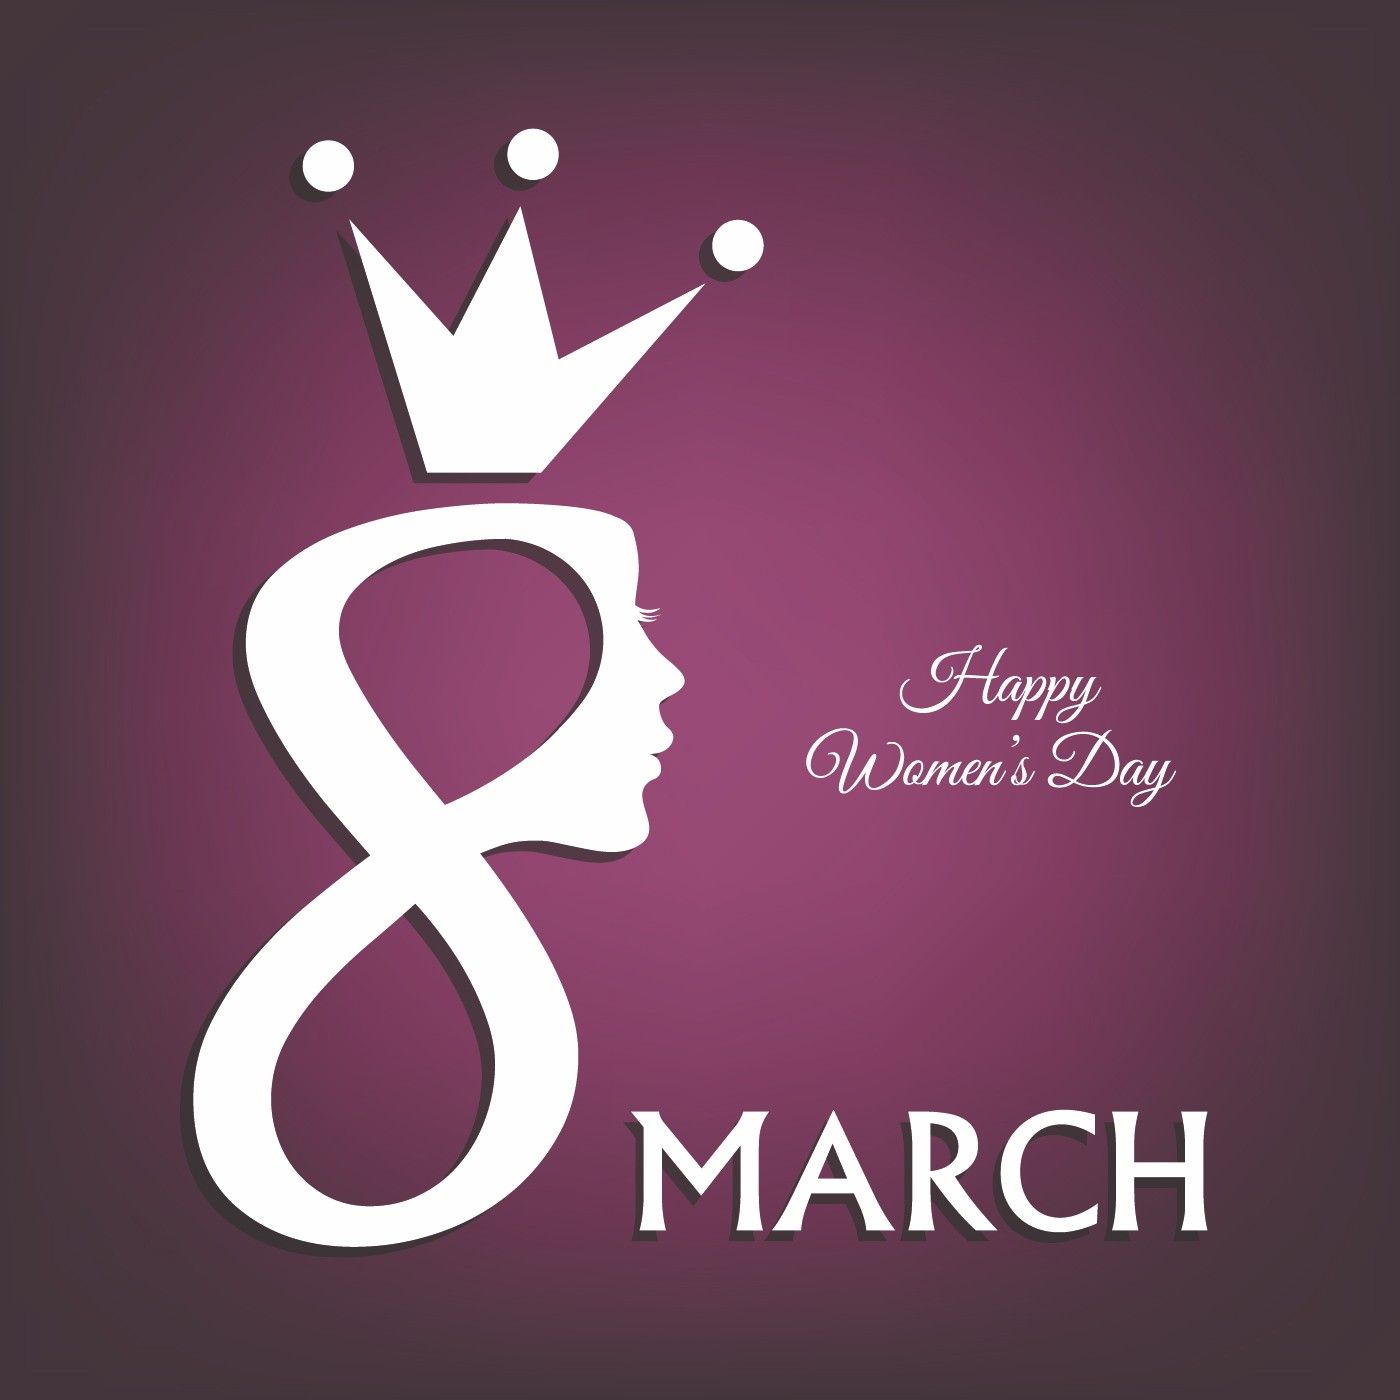 8th March. Women's Day Symbols, Greeting Cards